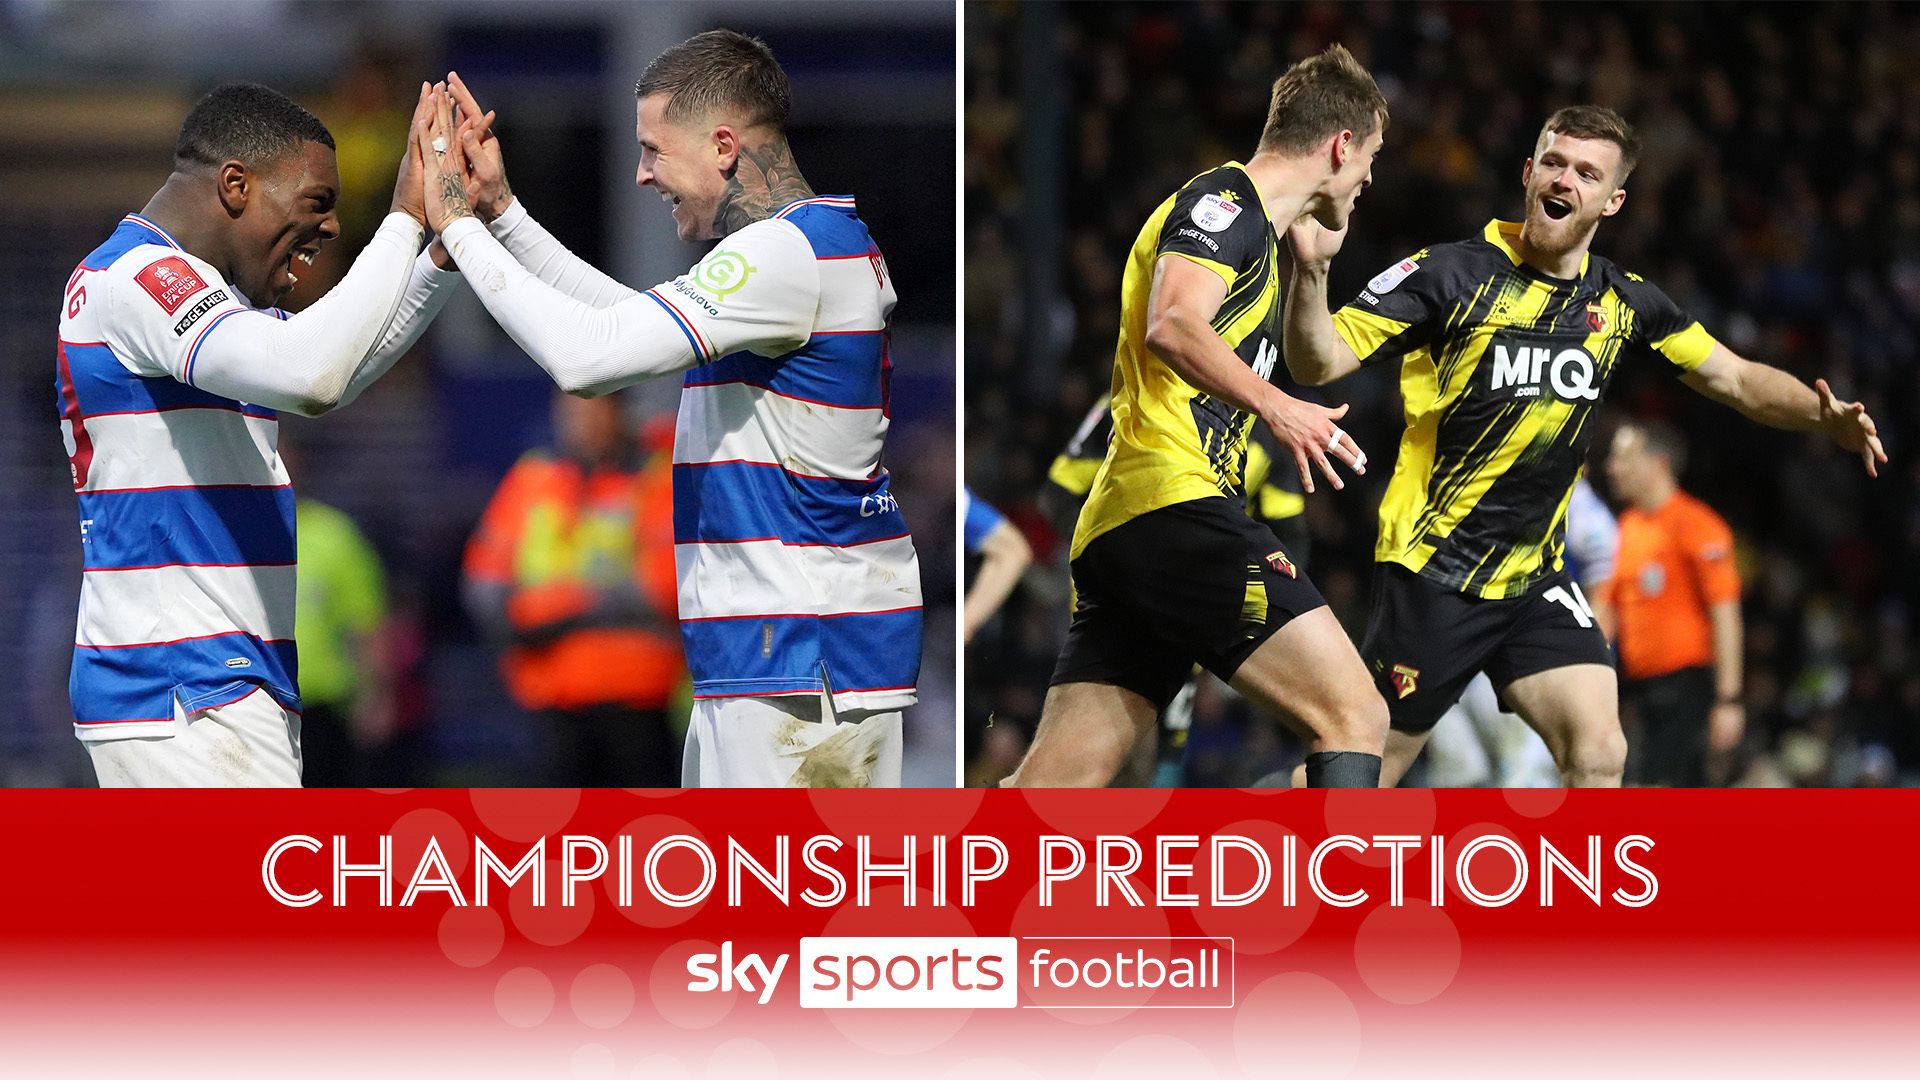 Champ Predictions: Watford to continue QPR's struggles